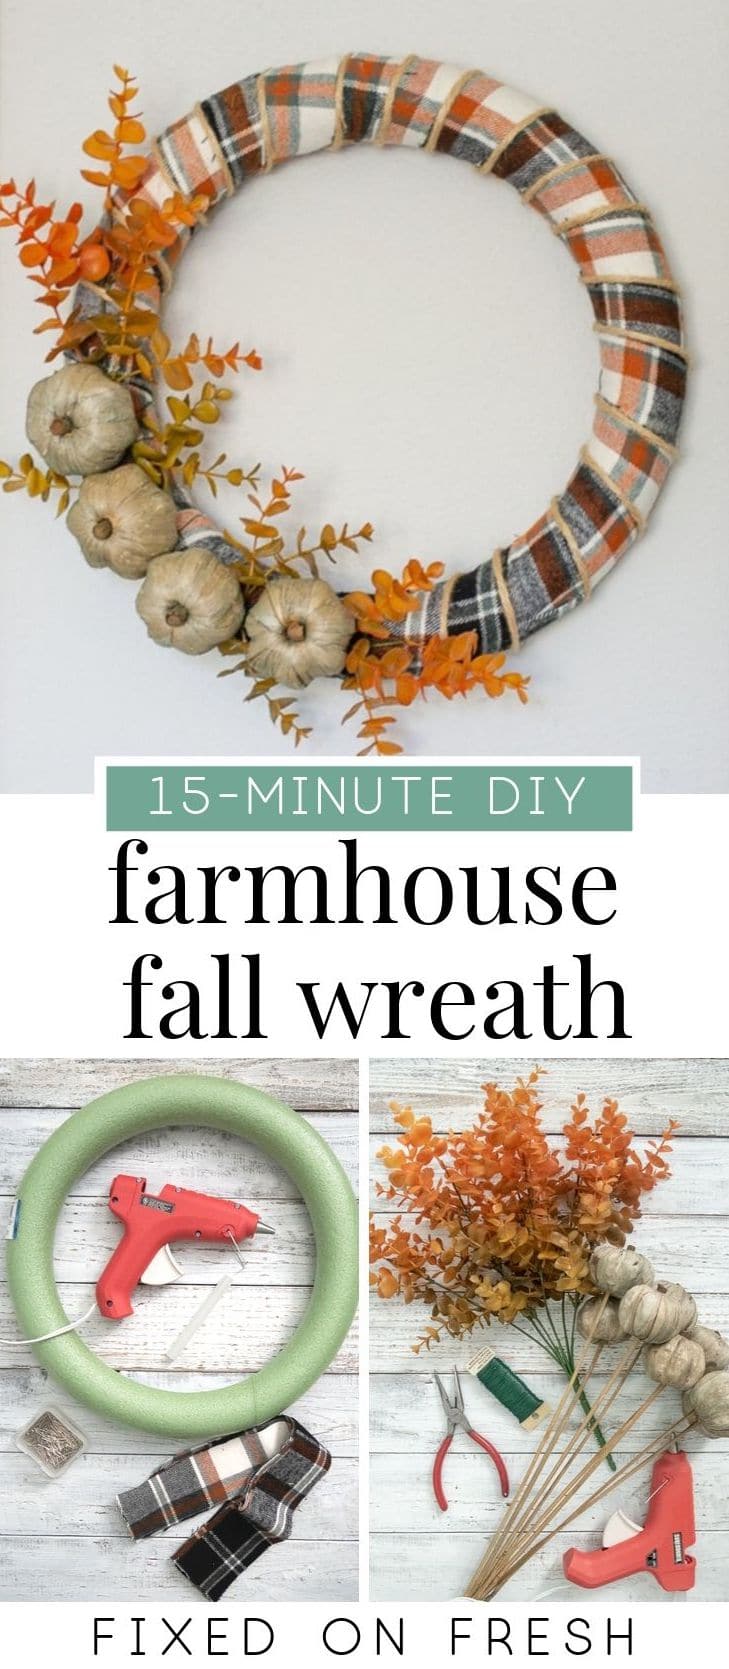 Learn how to make a farmhouse inspired fall wreath using leftover fabric or ribbon and a couple stems fall stems and styrofoam pumpkins. this simple project can be made in 15 minutes and is budget friendly! #diy #fall #wreath